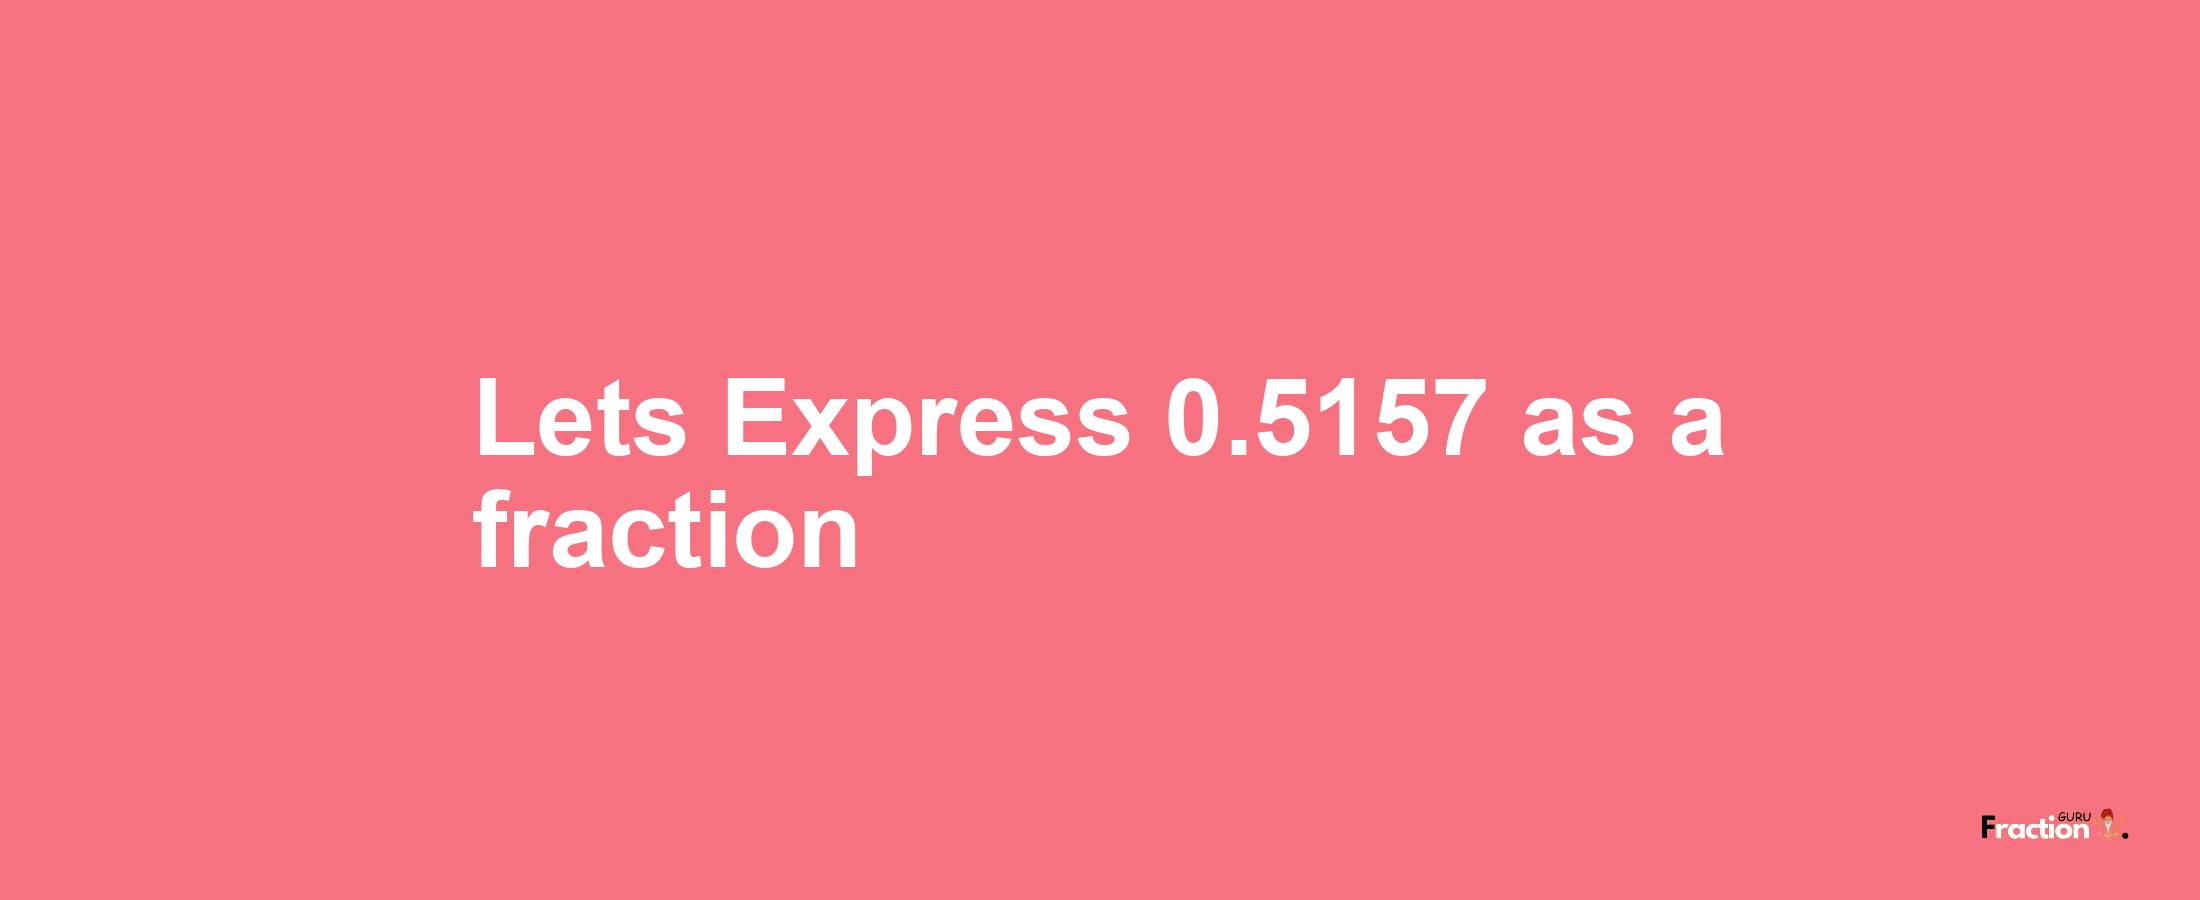 Lets Express 0.5157 as afraction